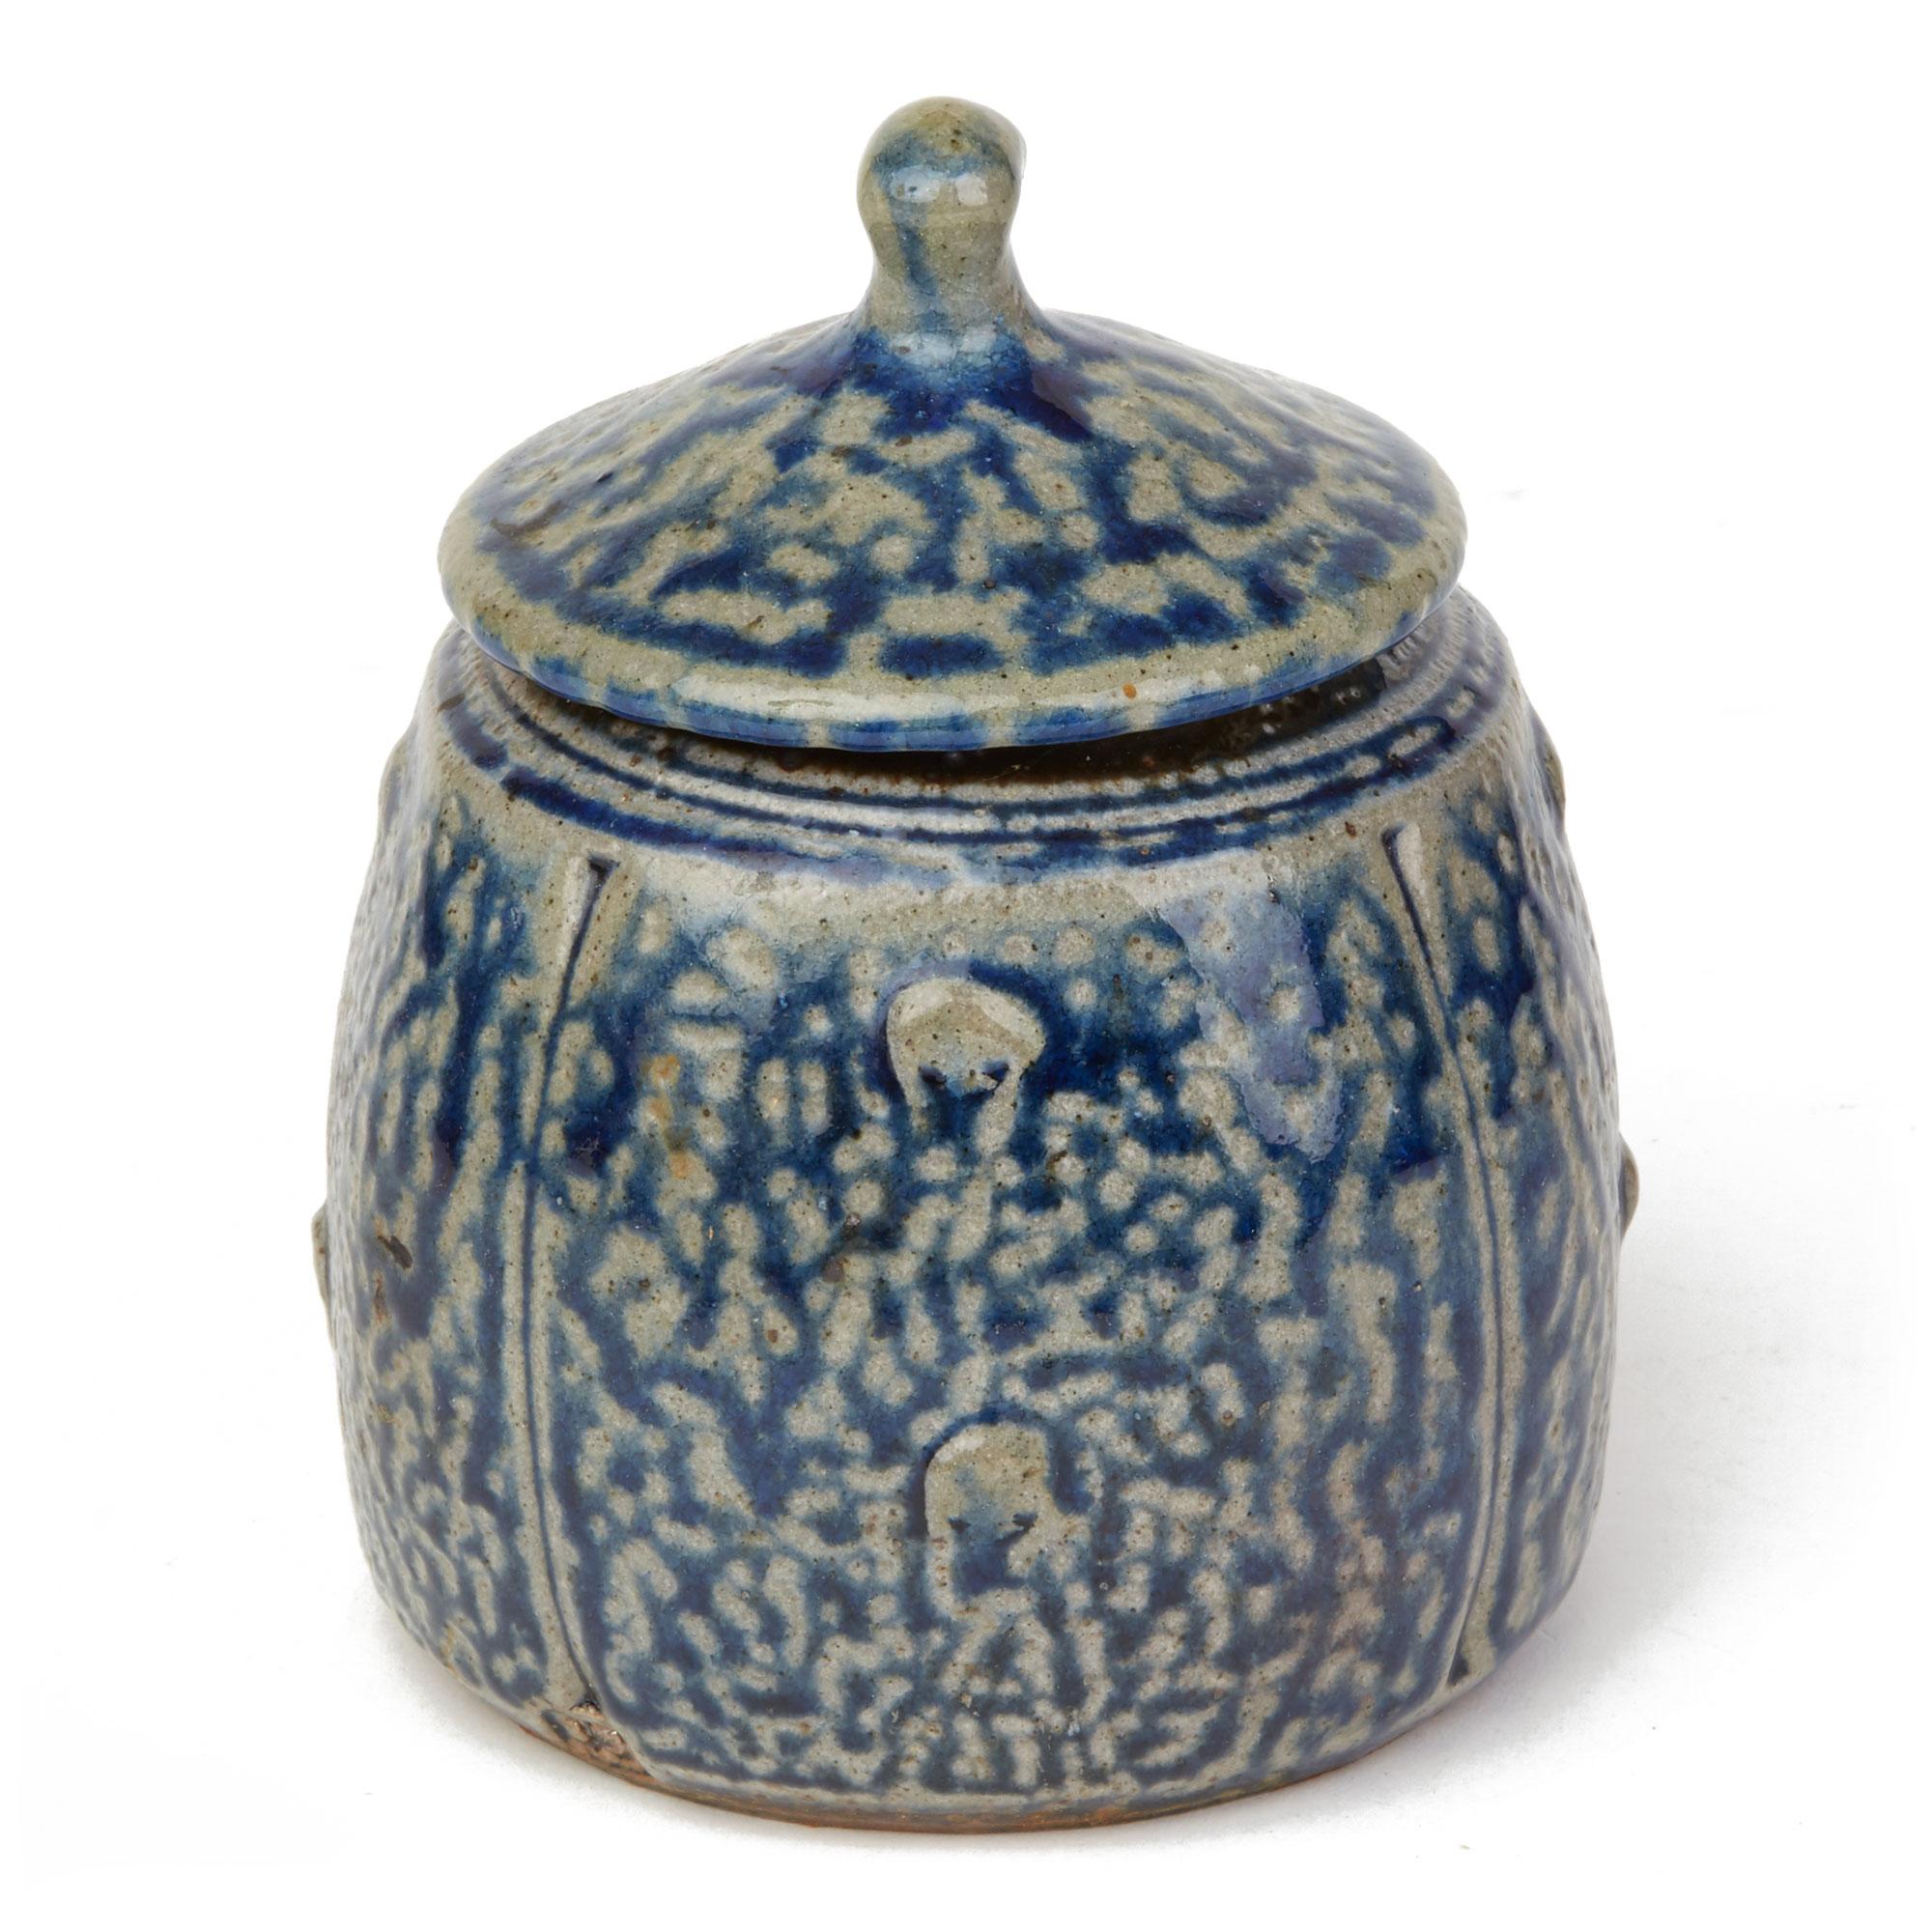 A fine vintage English blue salt glazed studio pottery lidded jar by renowned potter John Jelfs (English, b.1946) and dating from the 20th Century. This handcrafted jar is of rounded bulbous shape of rounded shape with a hat shaped cover with a